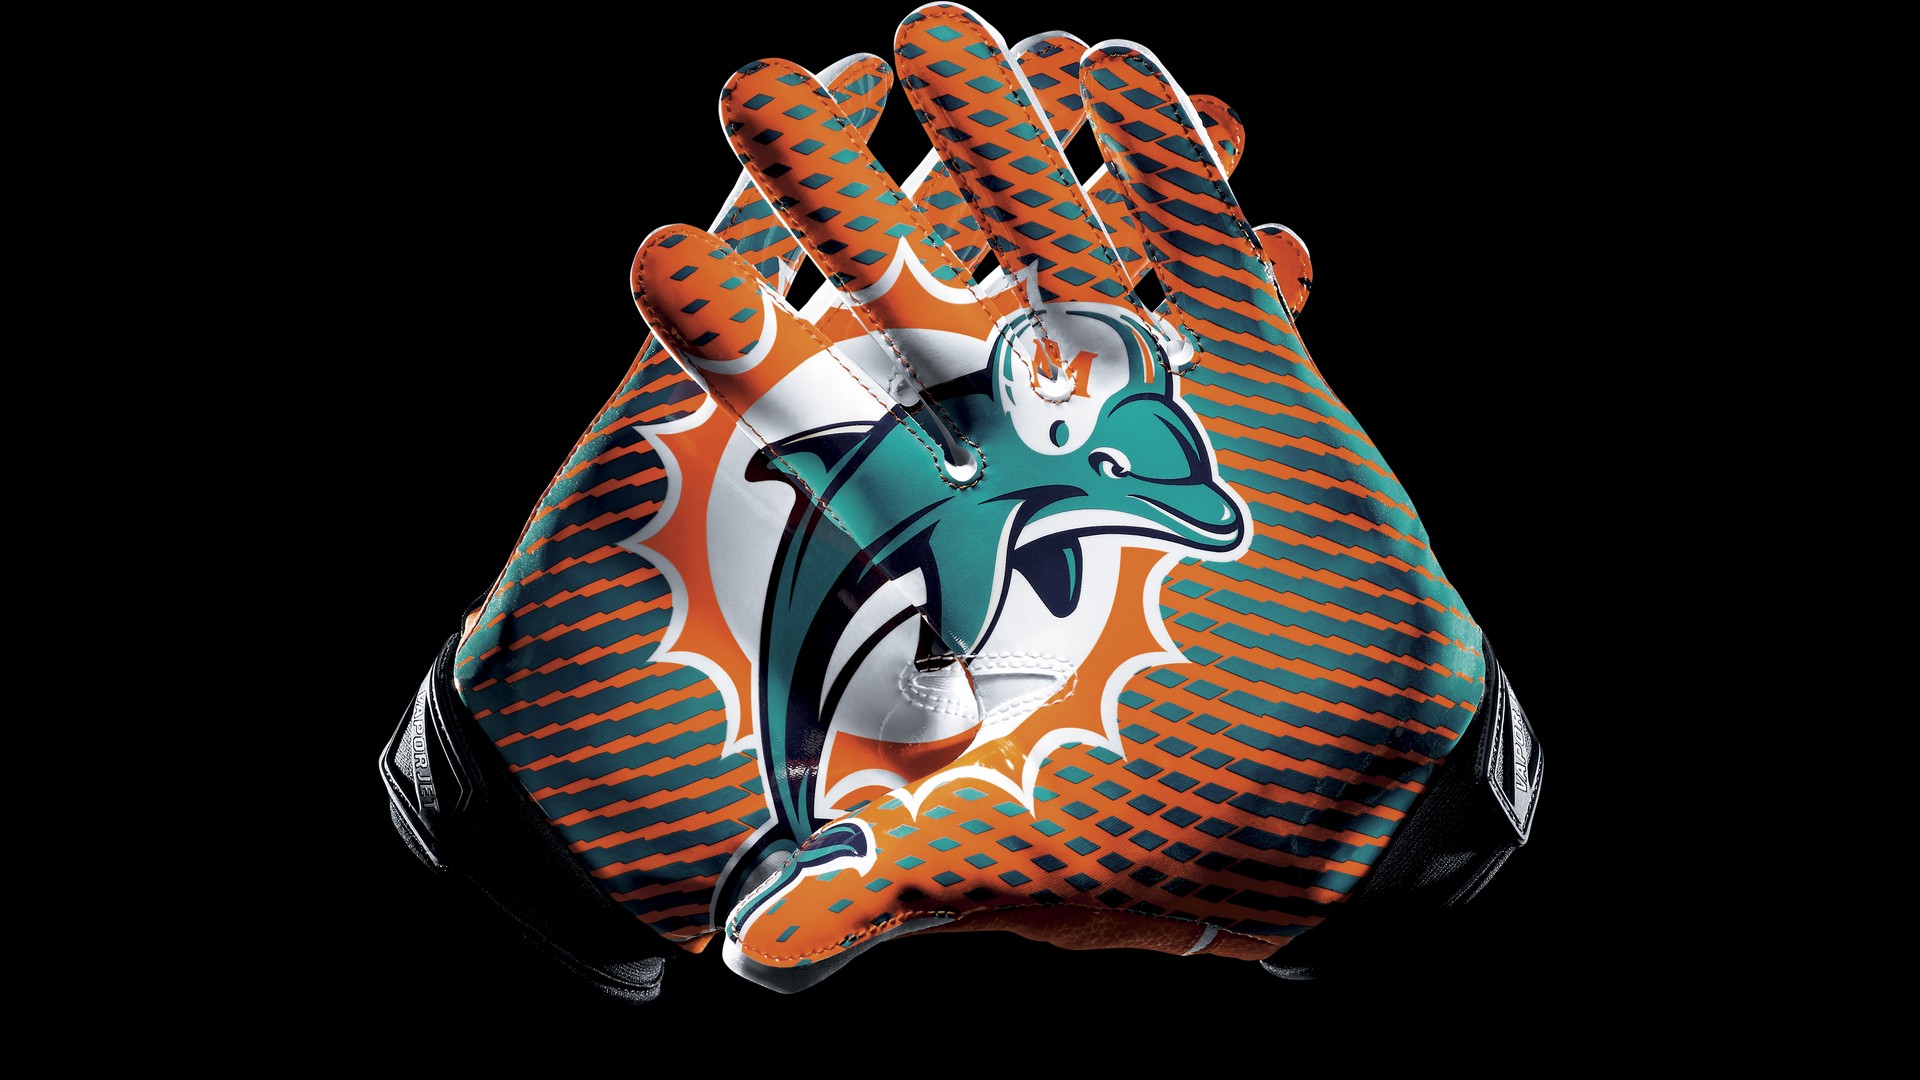 Wallpapers Miami Dolphins With Resolution 1920X1080 pixel. You can make this wallpaper for your Mac or Windows Desktop Background, iPhone, Android or Tablet and another Smartphone device for free